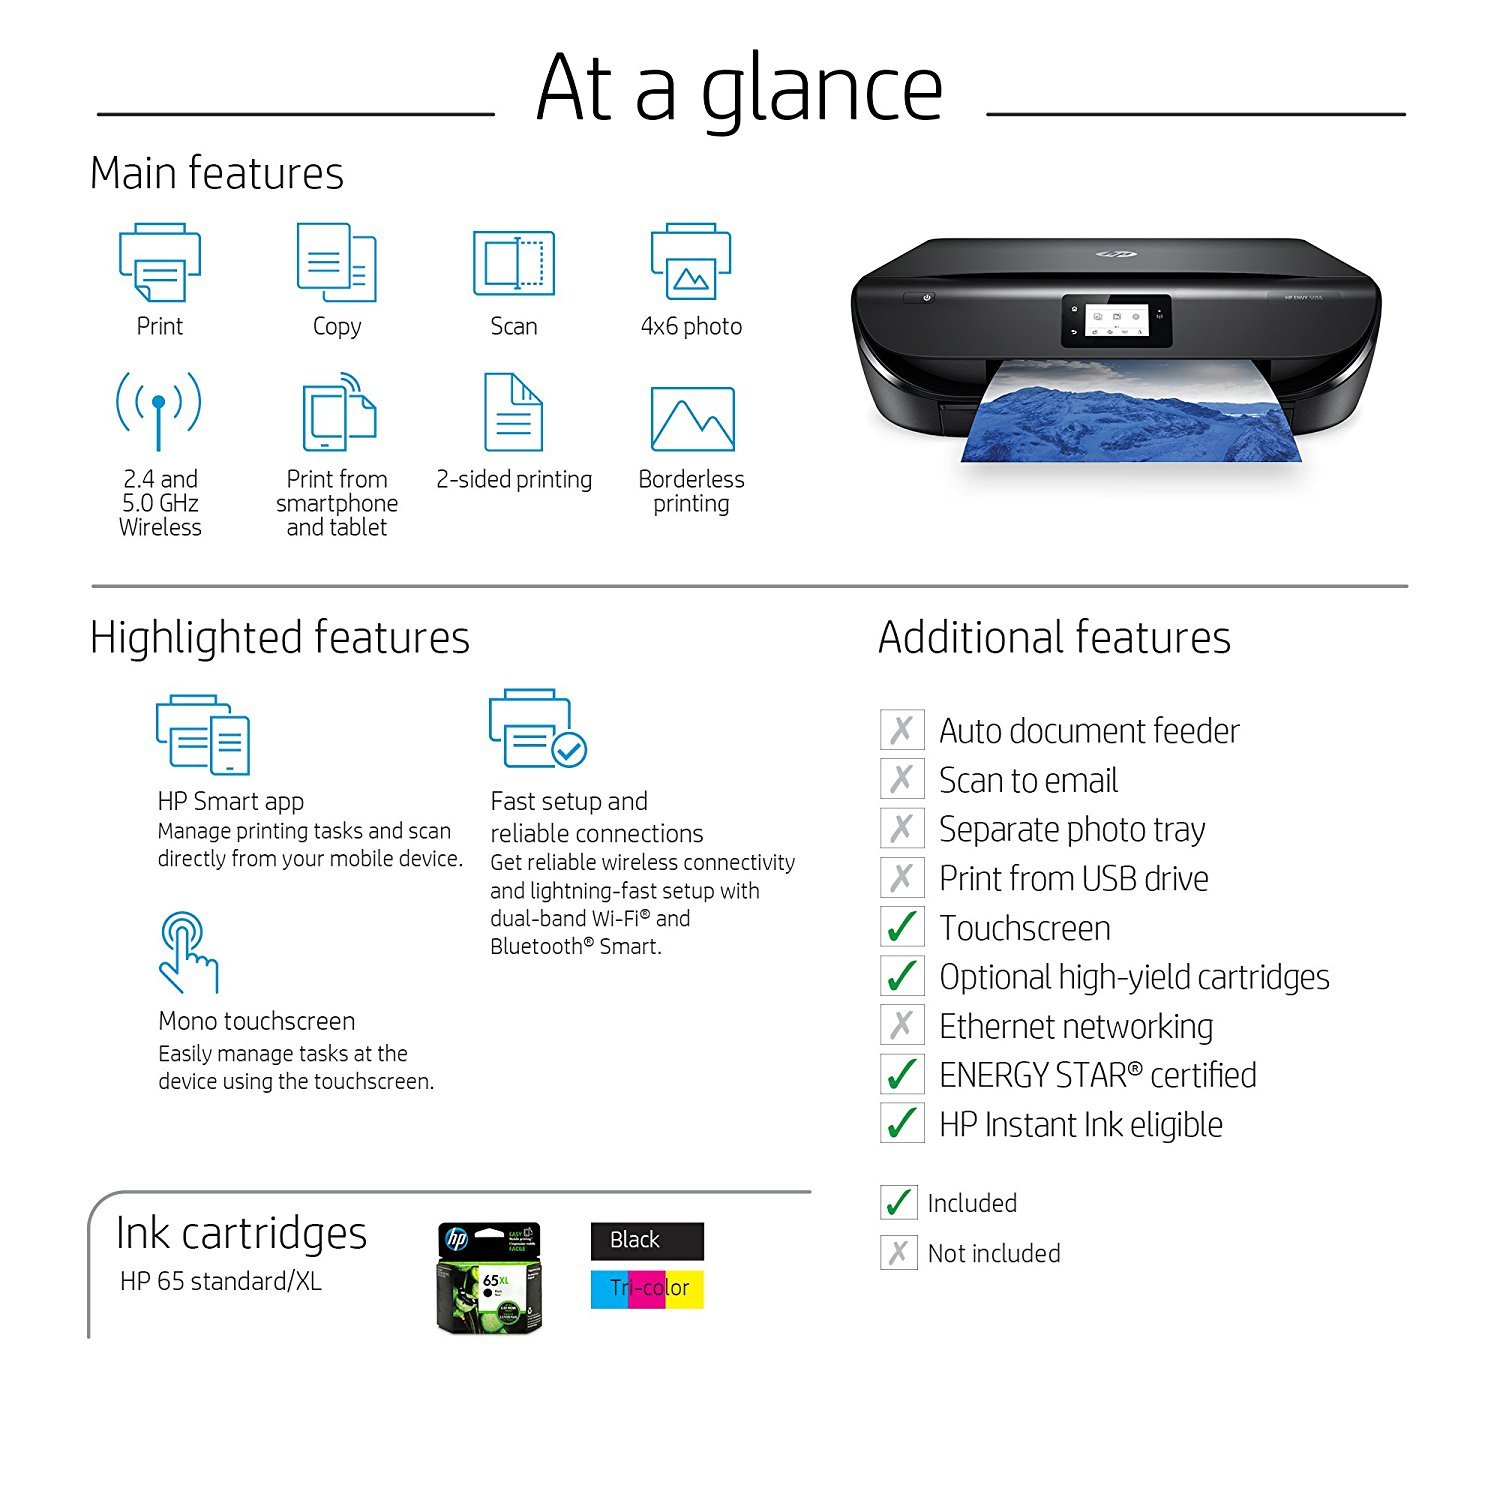 HP Envy 5055 Wireless All-in-One Photo Printer, HP Instant Ink & Amazon Dash Replenishment Ready (M2U85A)